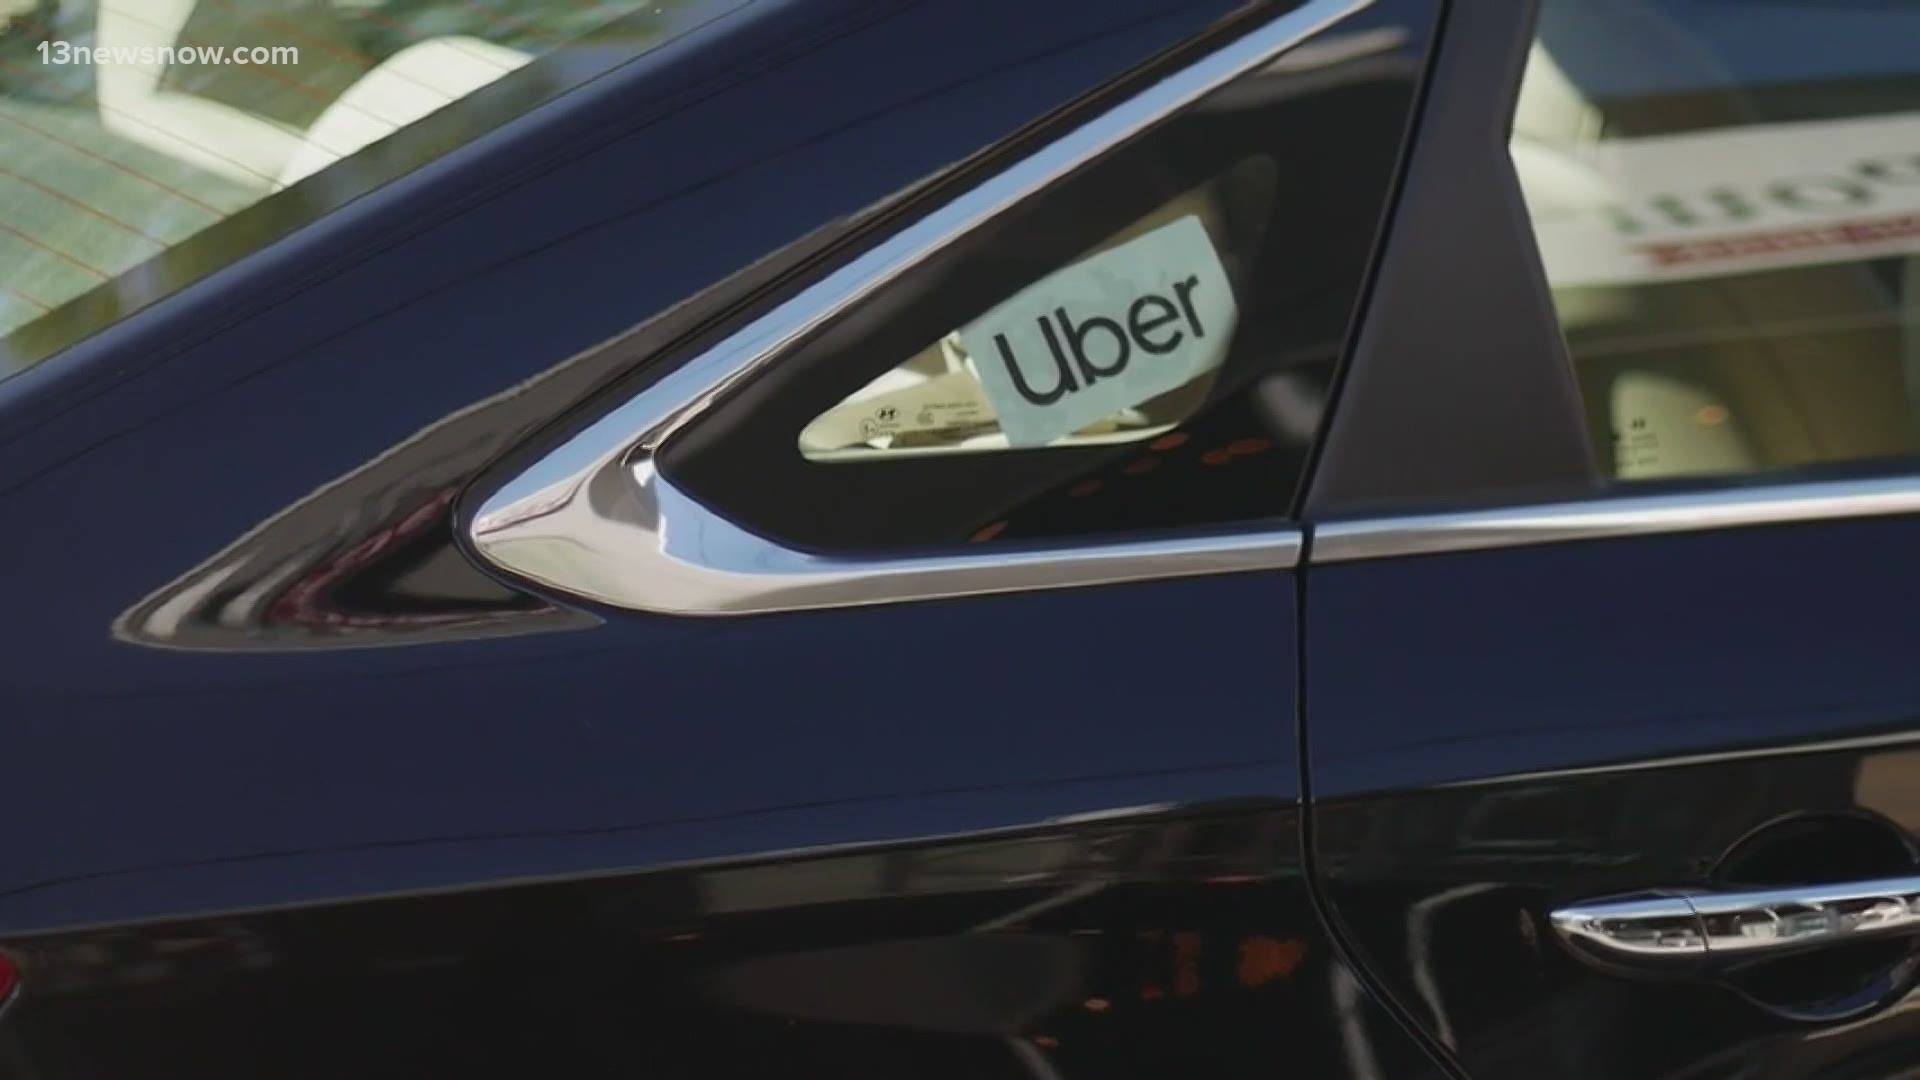 People in Hampton Roads tell us it's becoming more difficult to get an Uber or Lyft.